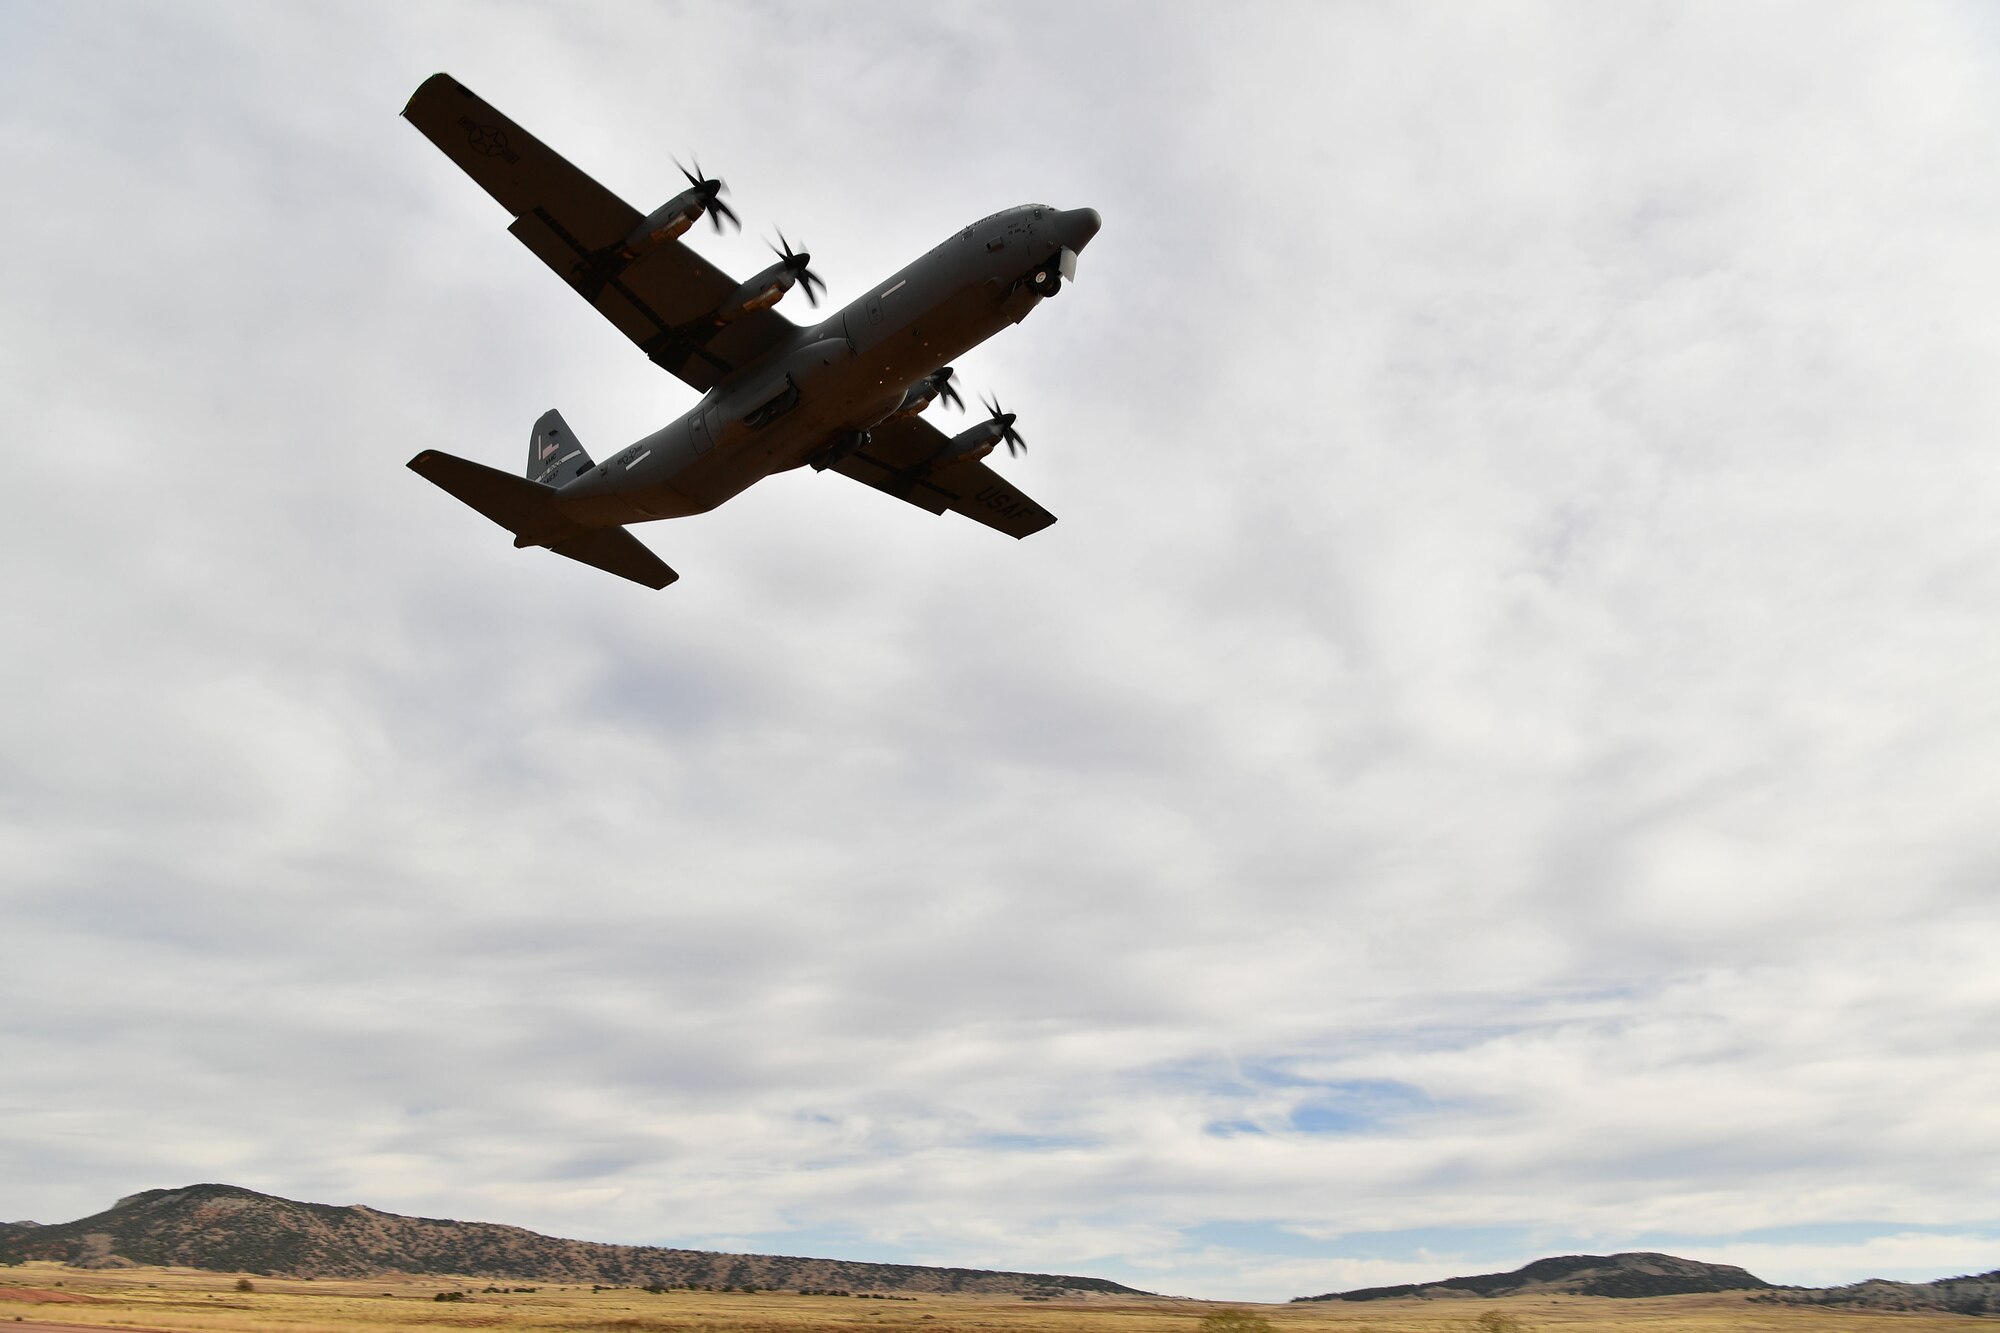 A C-130 takes off from a dirt runway.